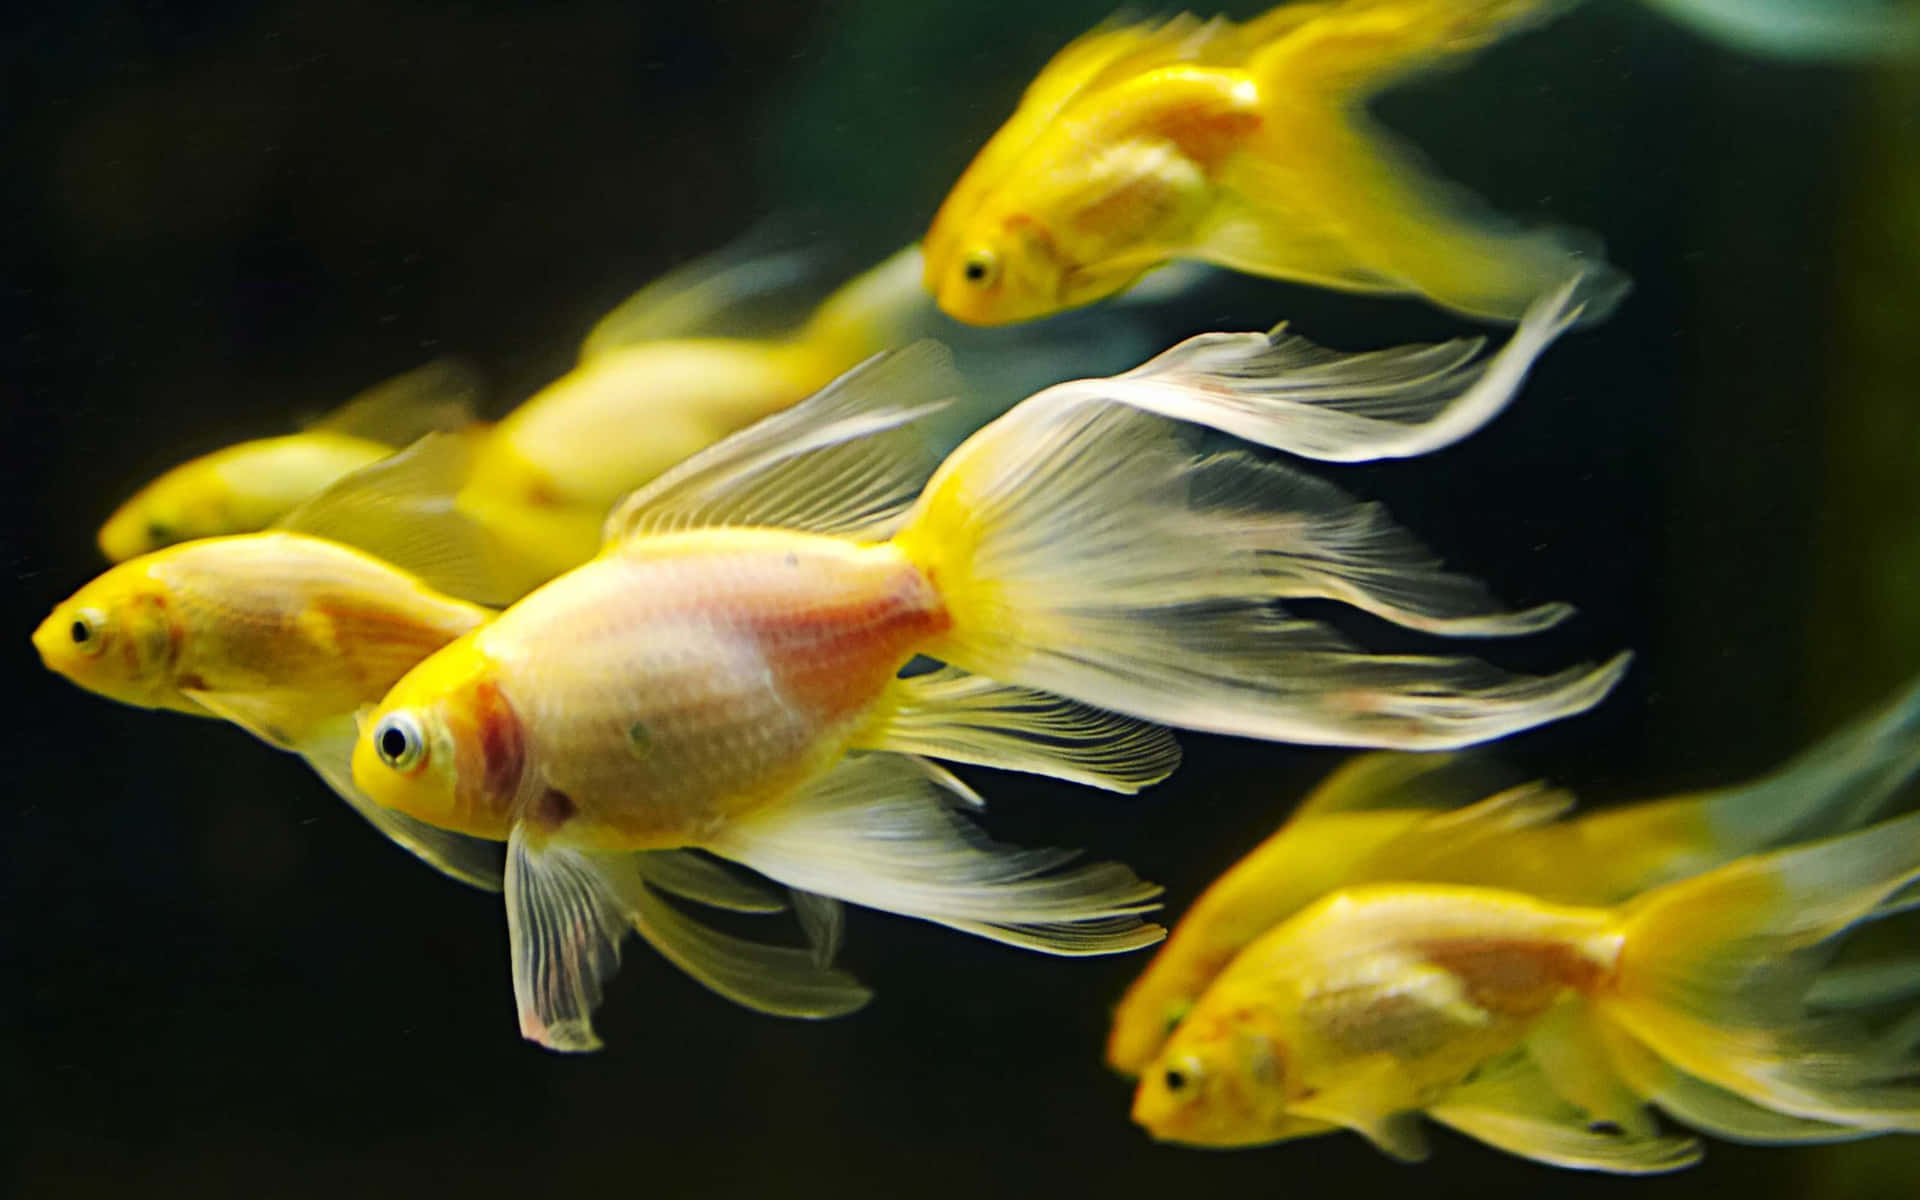 A Group Of Goldfish Swimming In An Aquarium